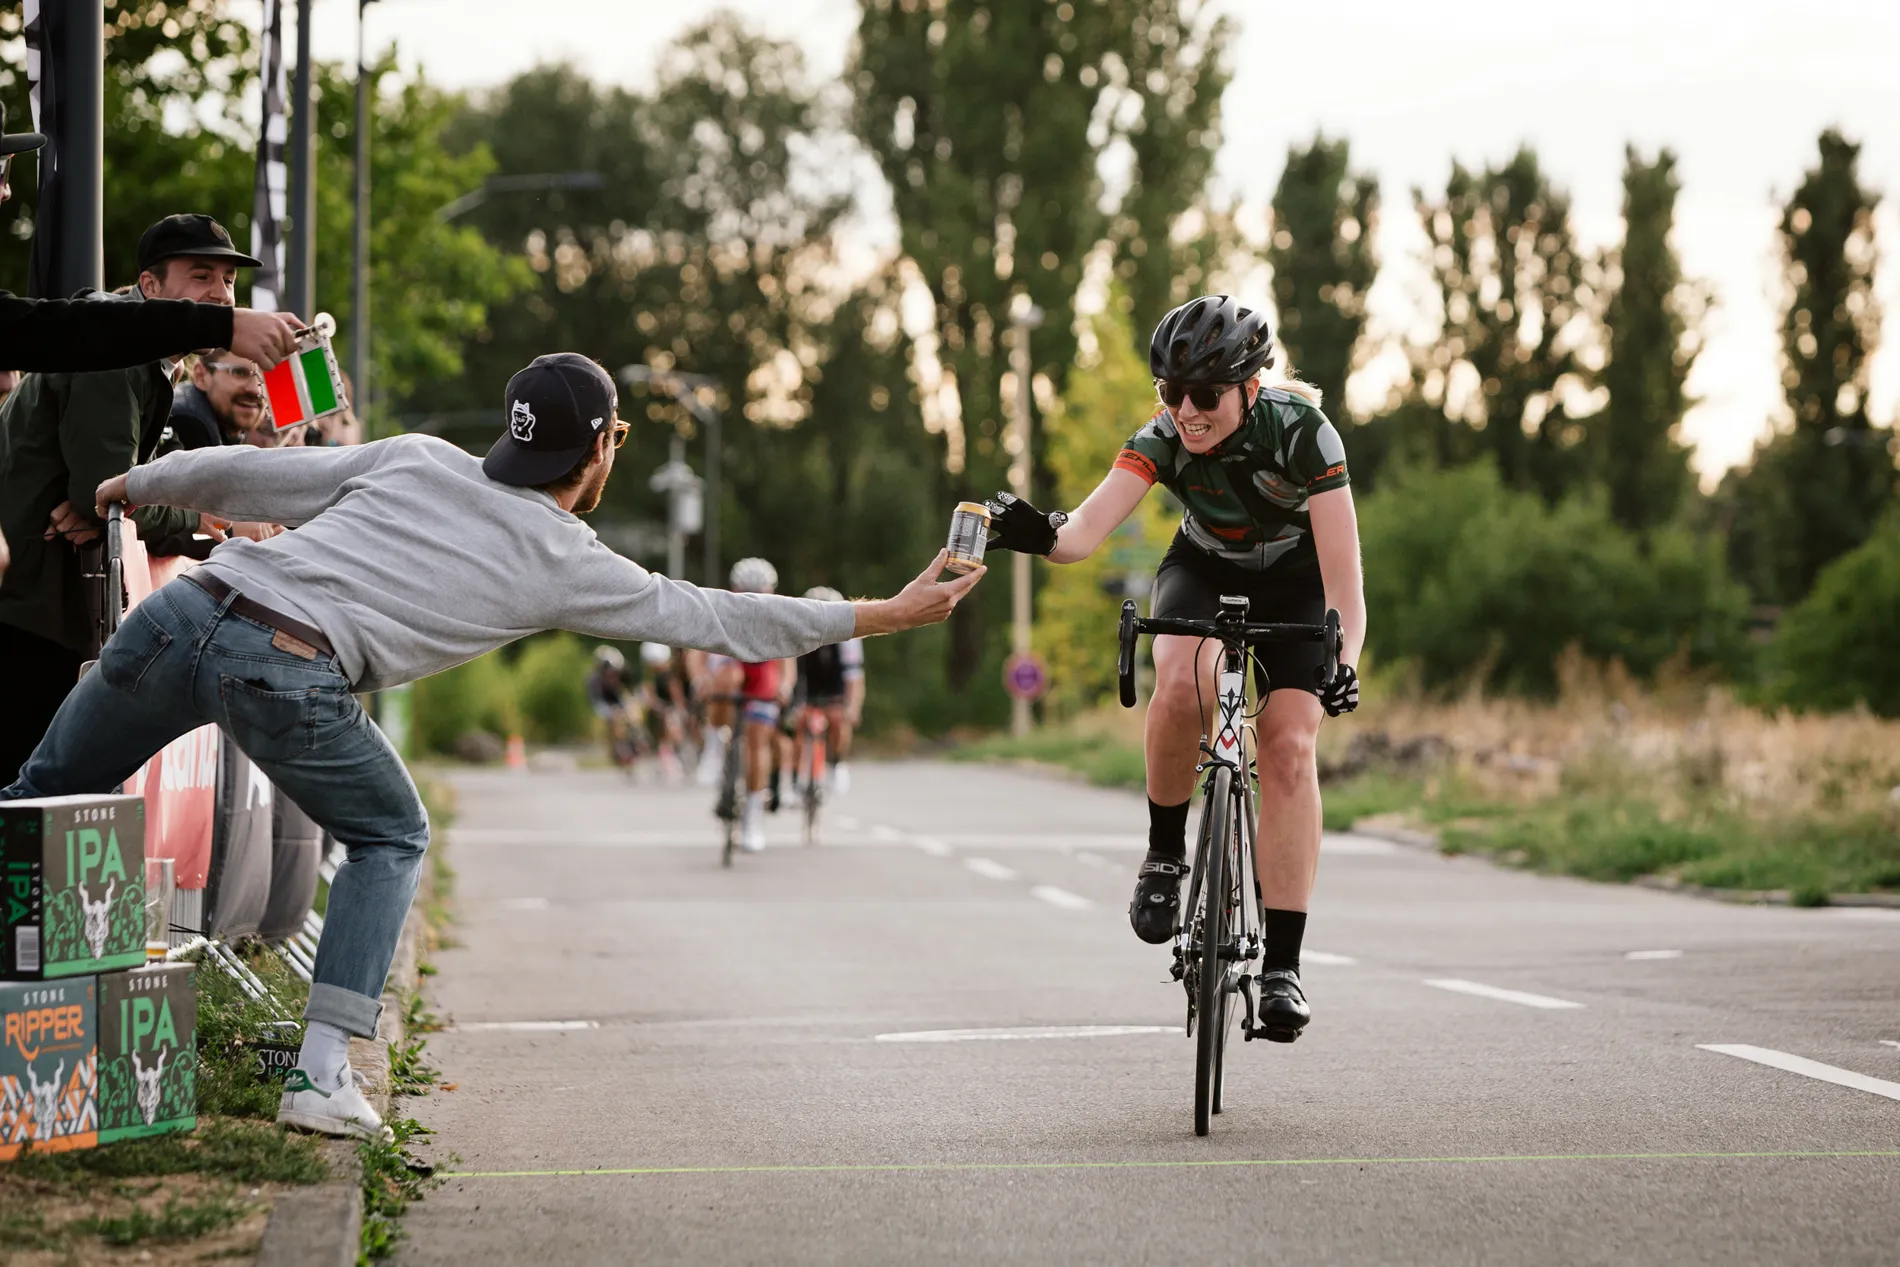 The SBSB Crit Race organized by Standert Bicycles and Stone Brew Berlin